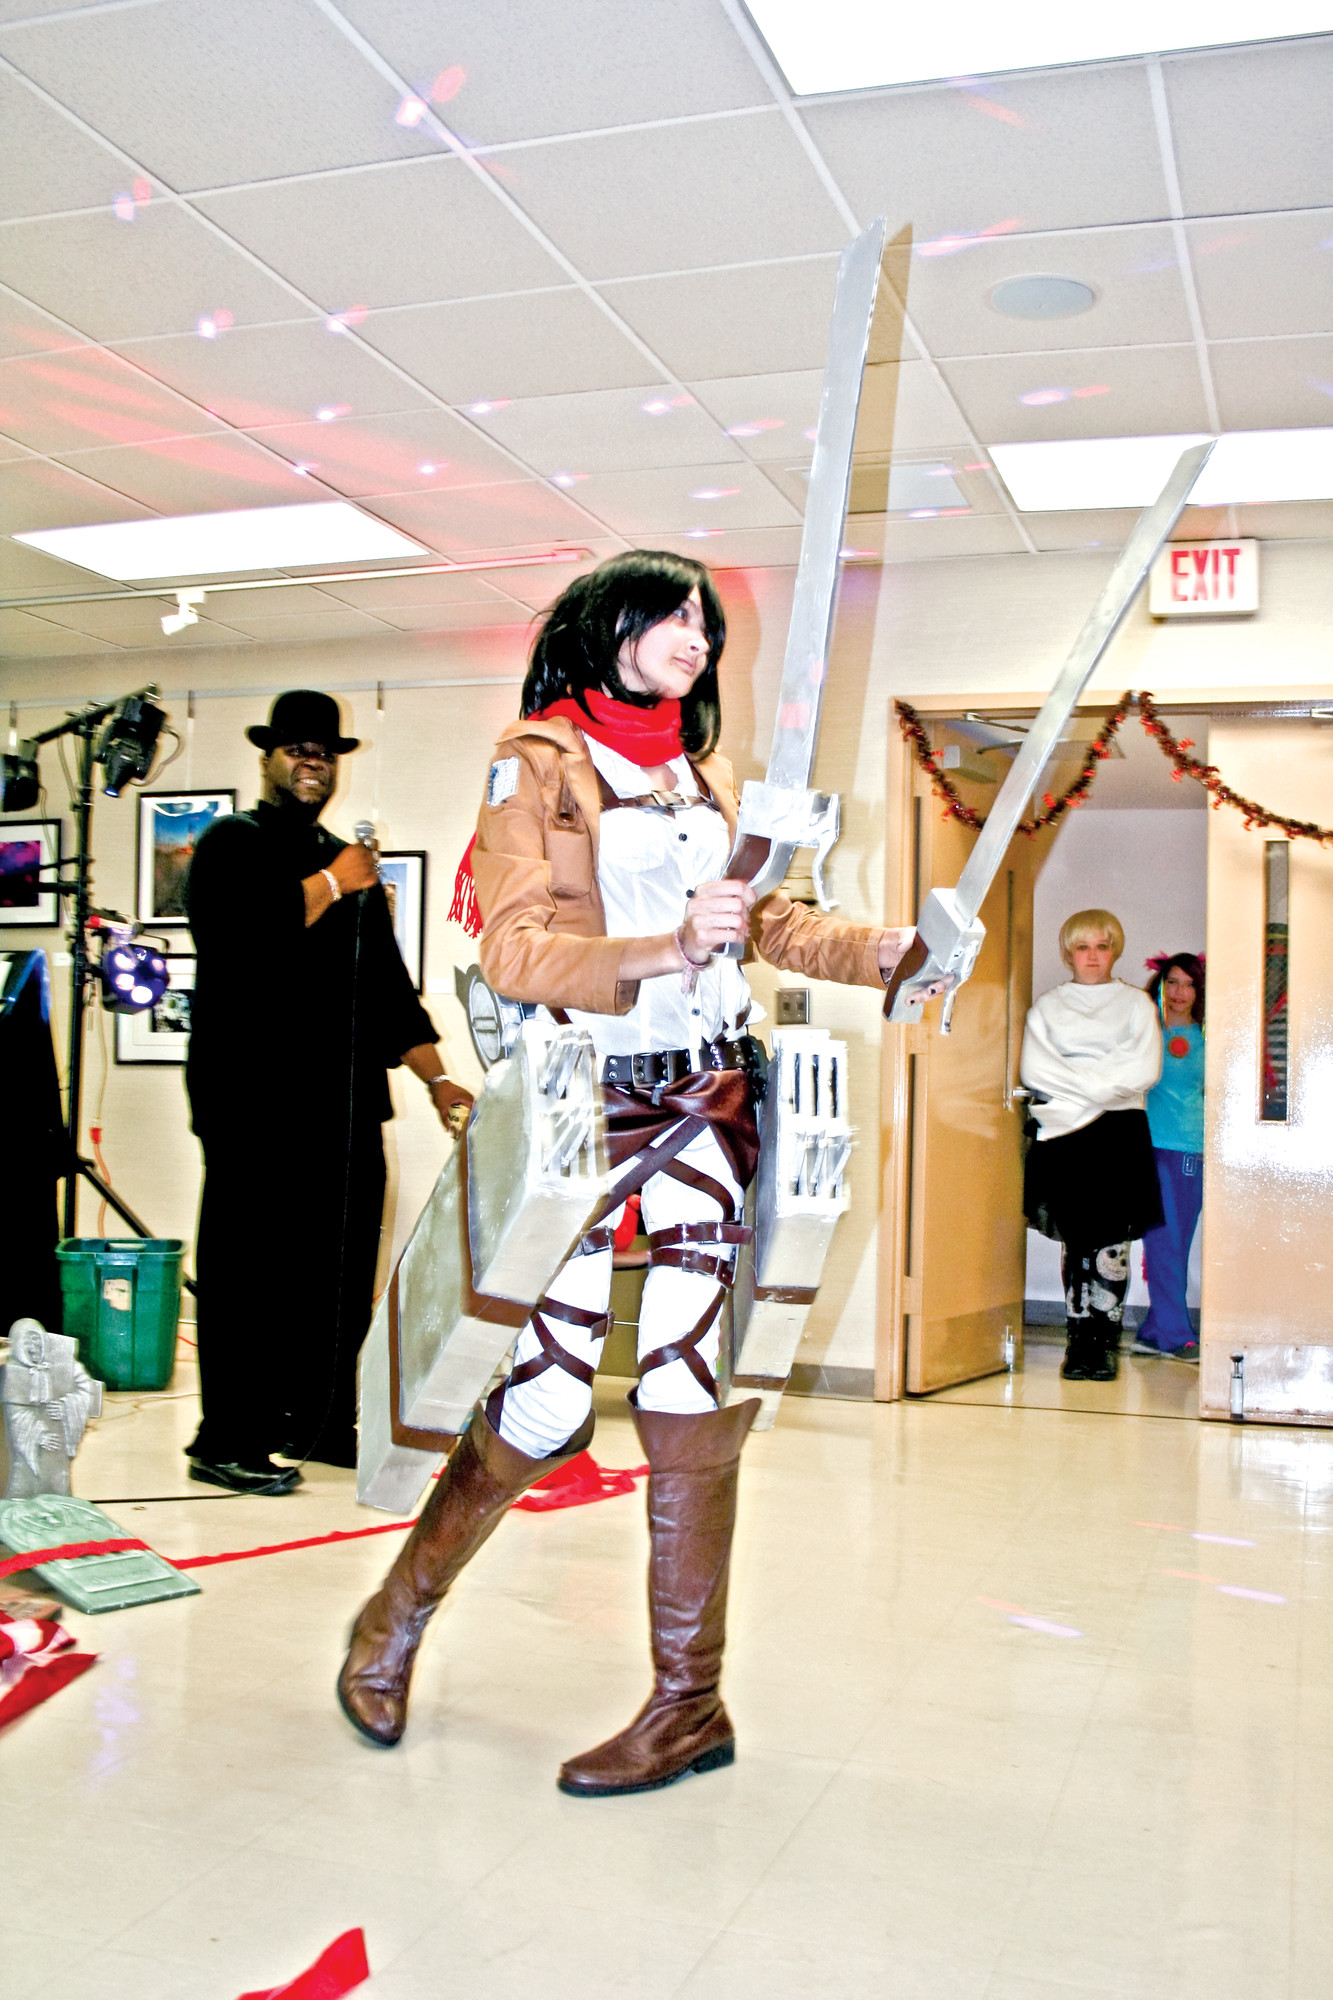 Gabrielle Eversgerd posed in her homemade Mikasa costume from the anime Attack on Titan.